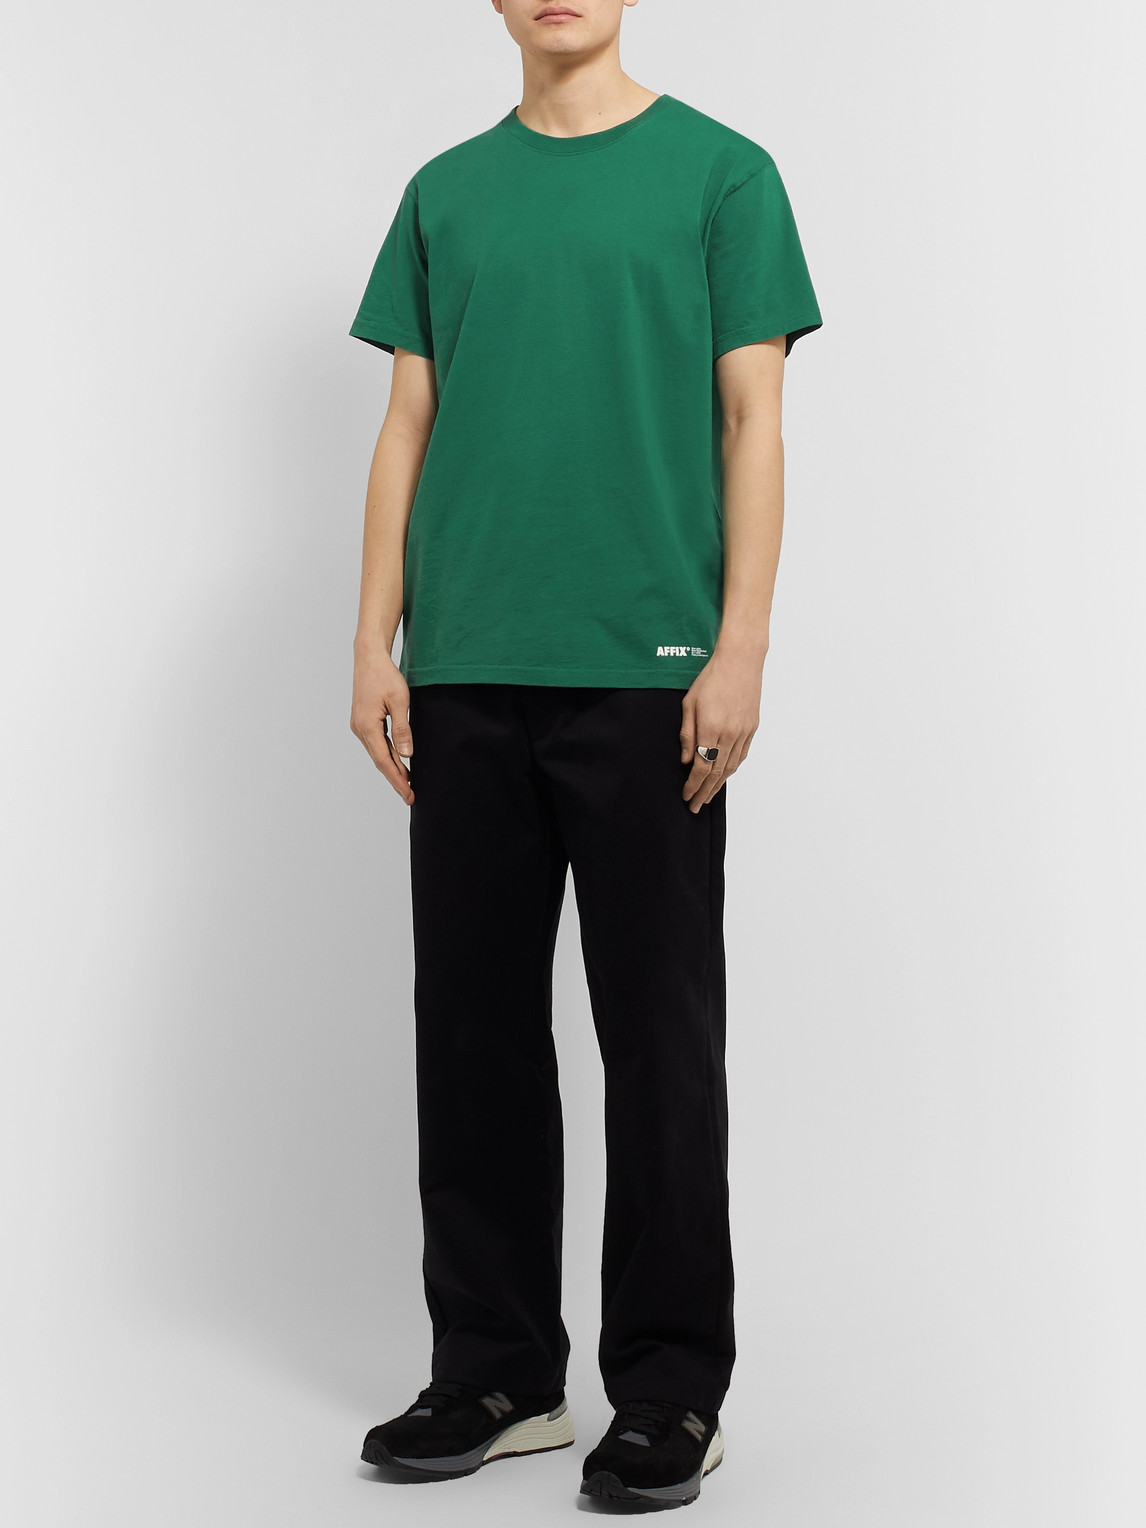 Affix Opening Ceremony Micro Logo T-shirt In Green